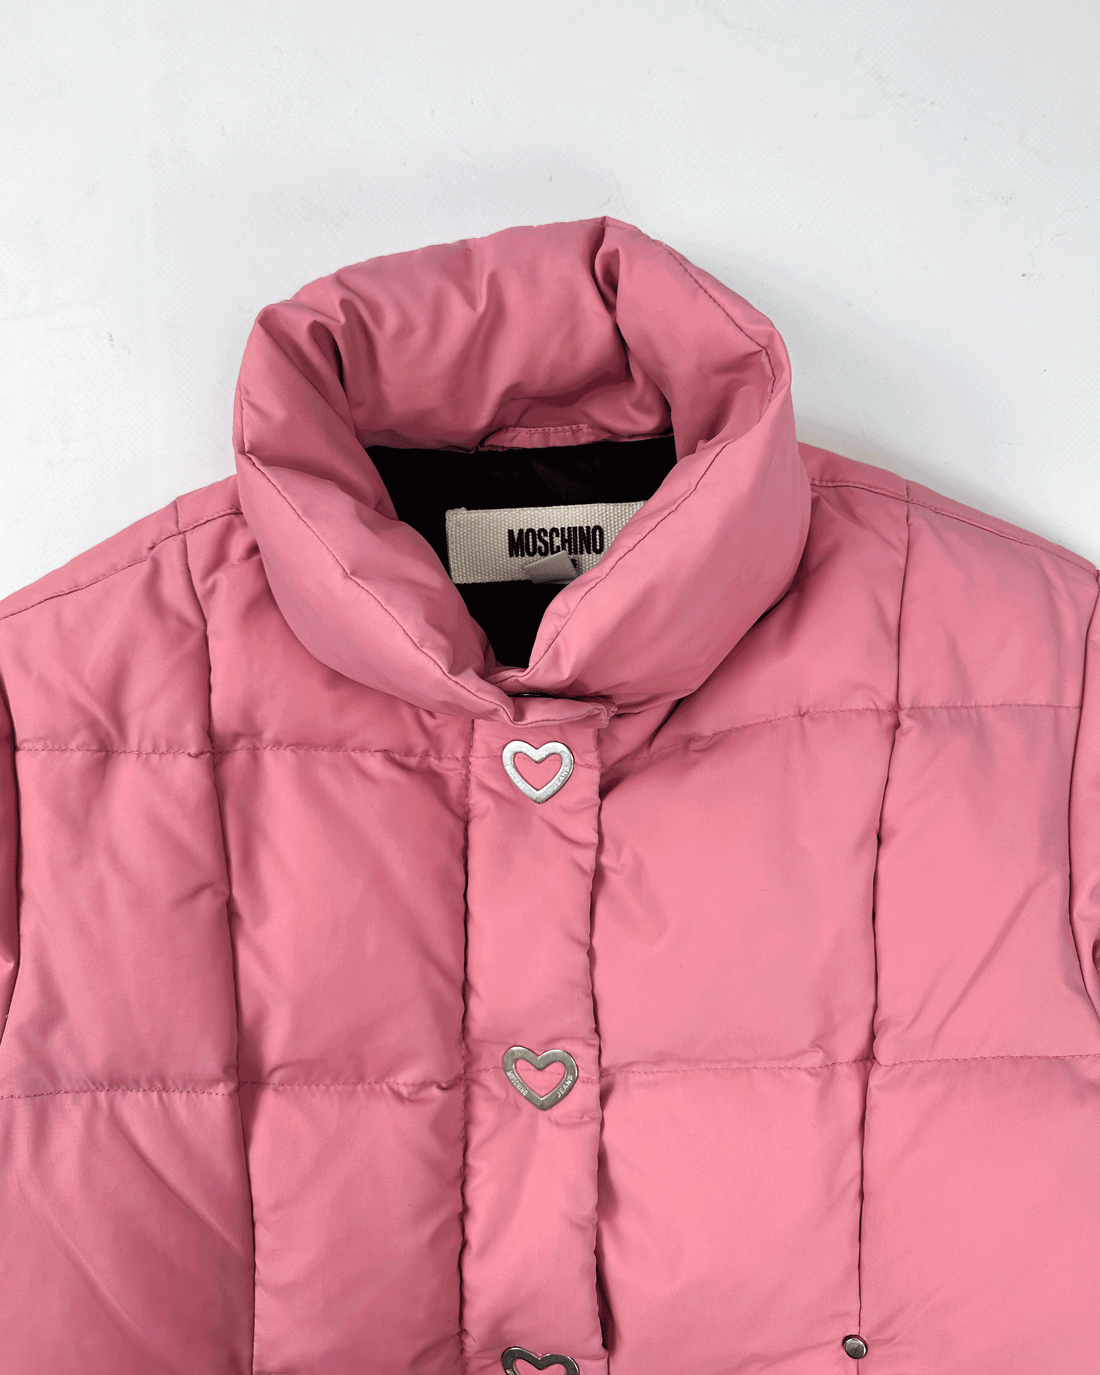 Moschino Silver Hearts Pink Puffer Jacket 2000's